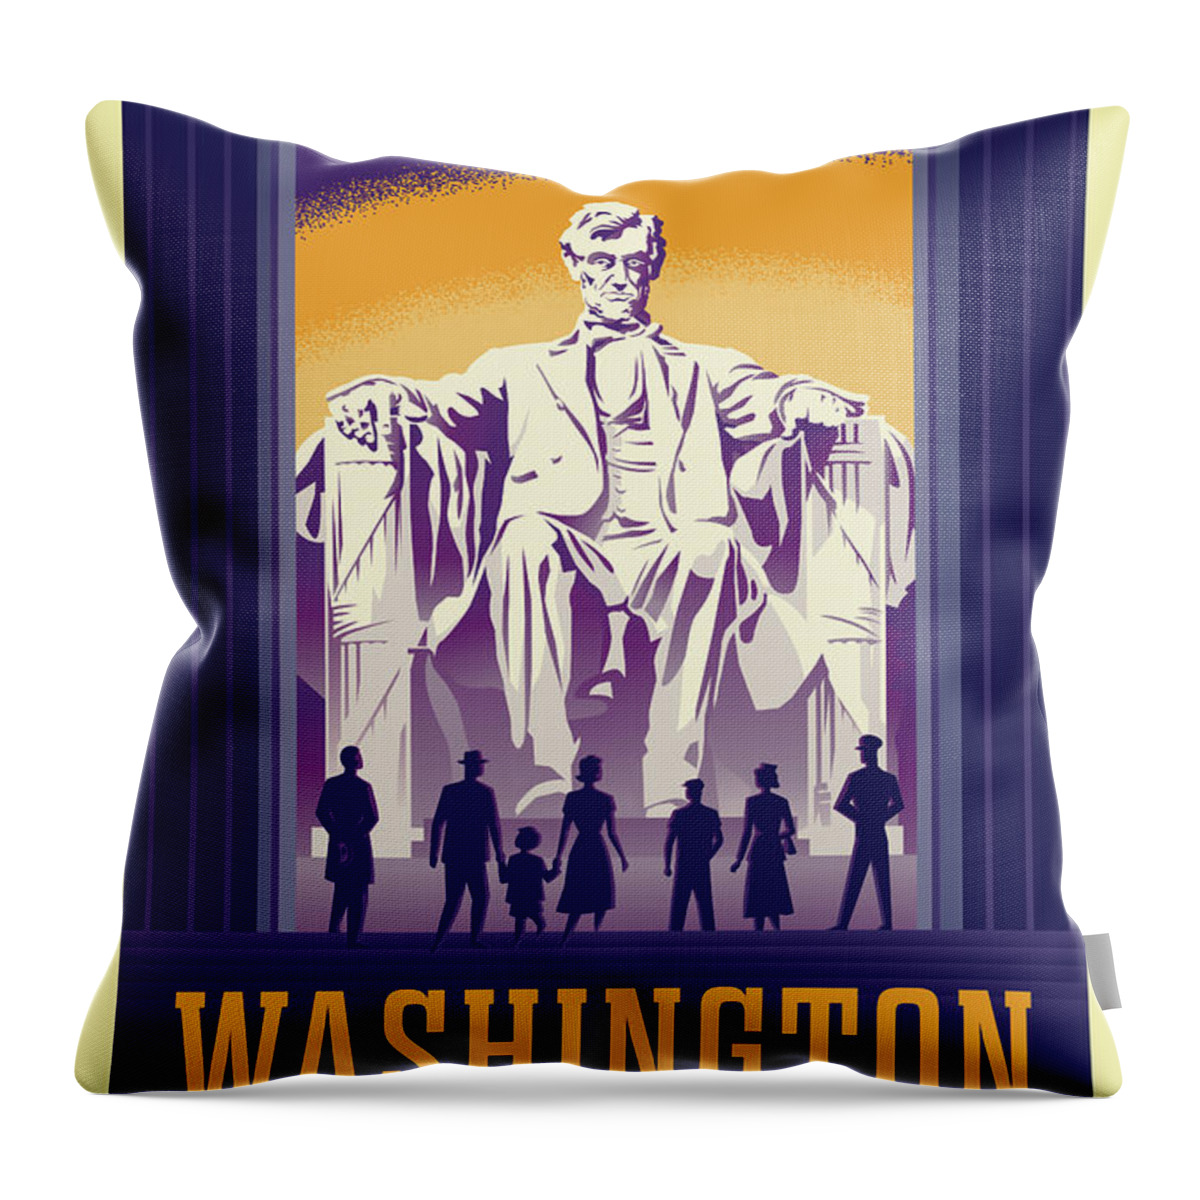 Virginia Throw Pillow featuring the digital art Washing D.C. Vintage Style Travel Poster by Jim Zahniser